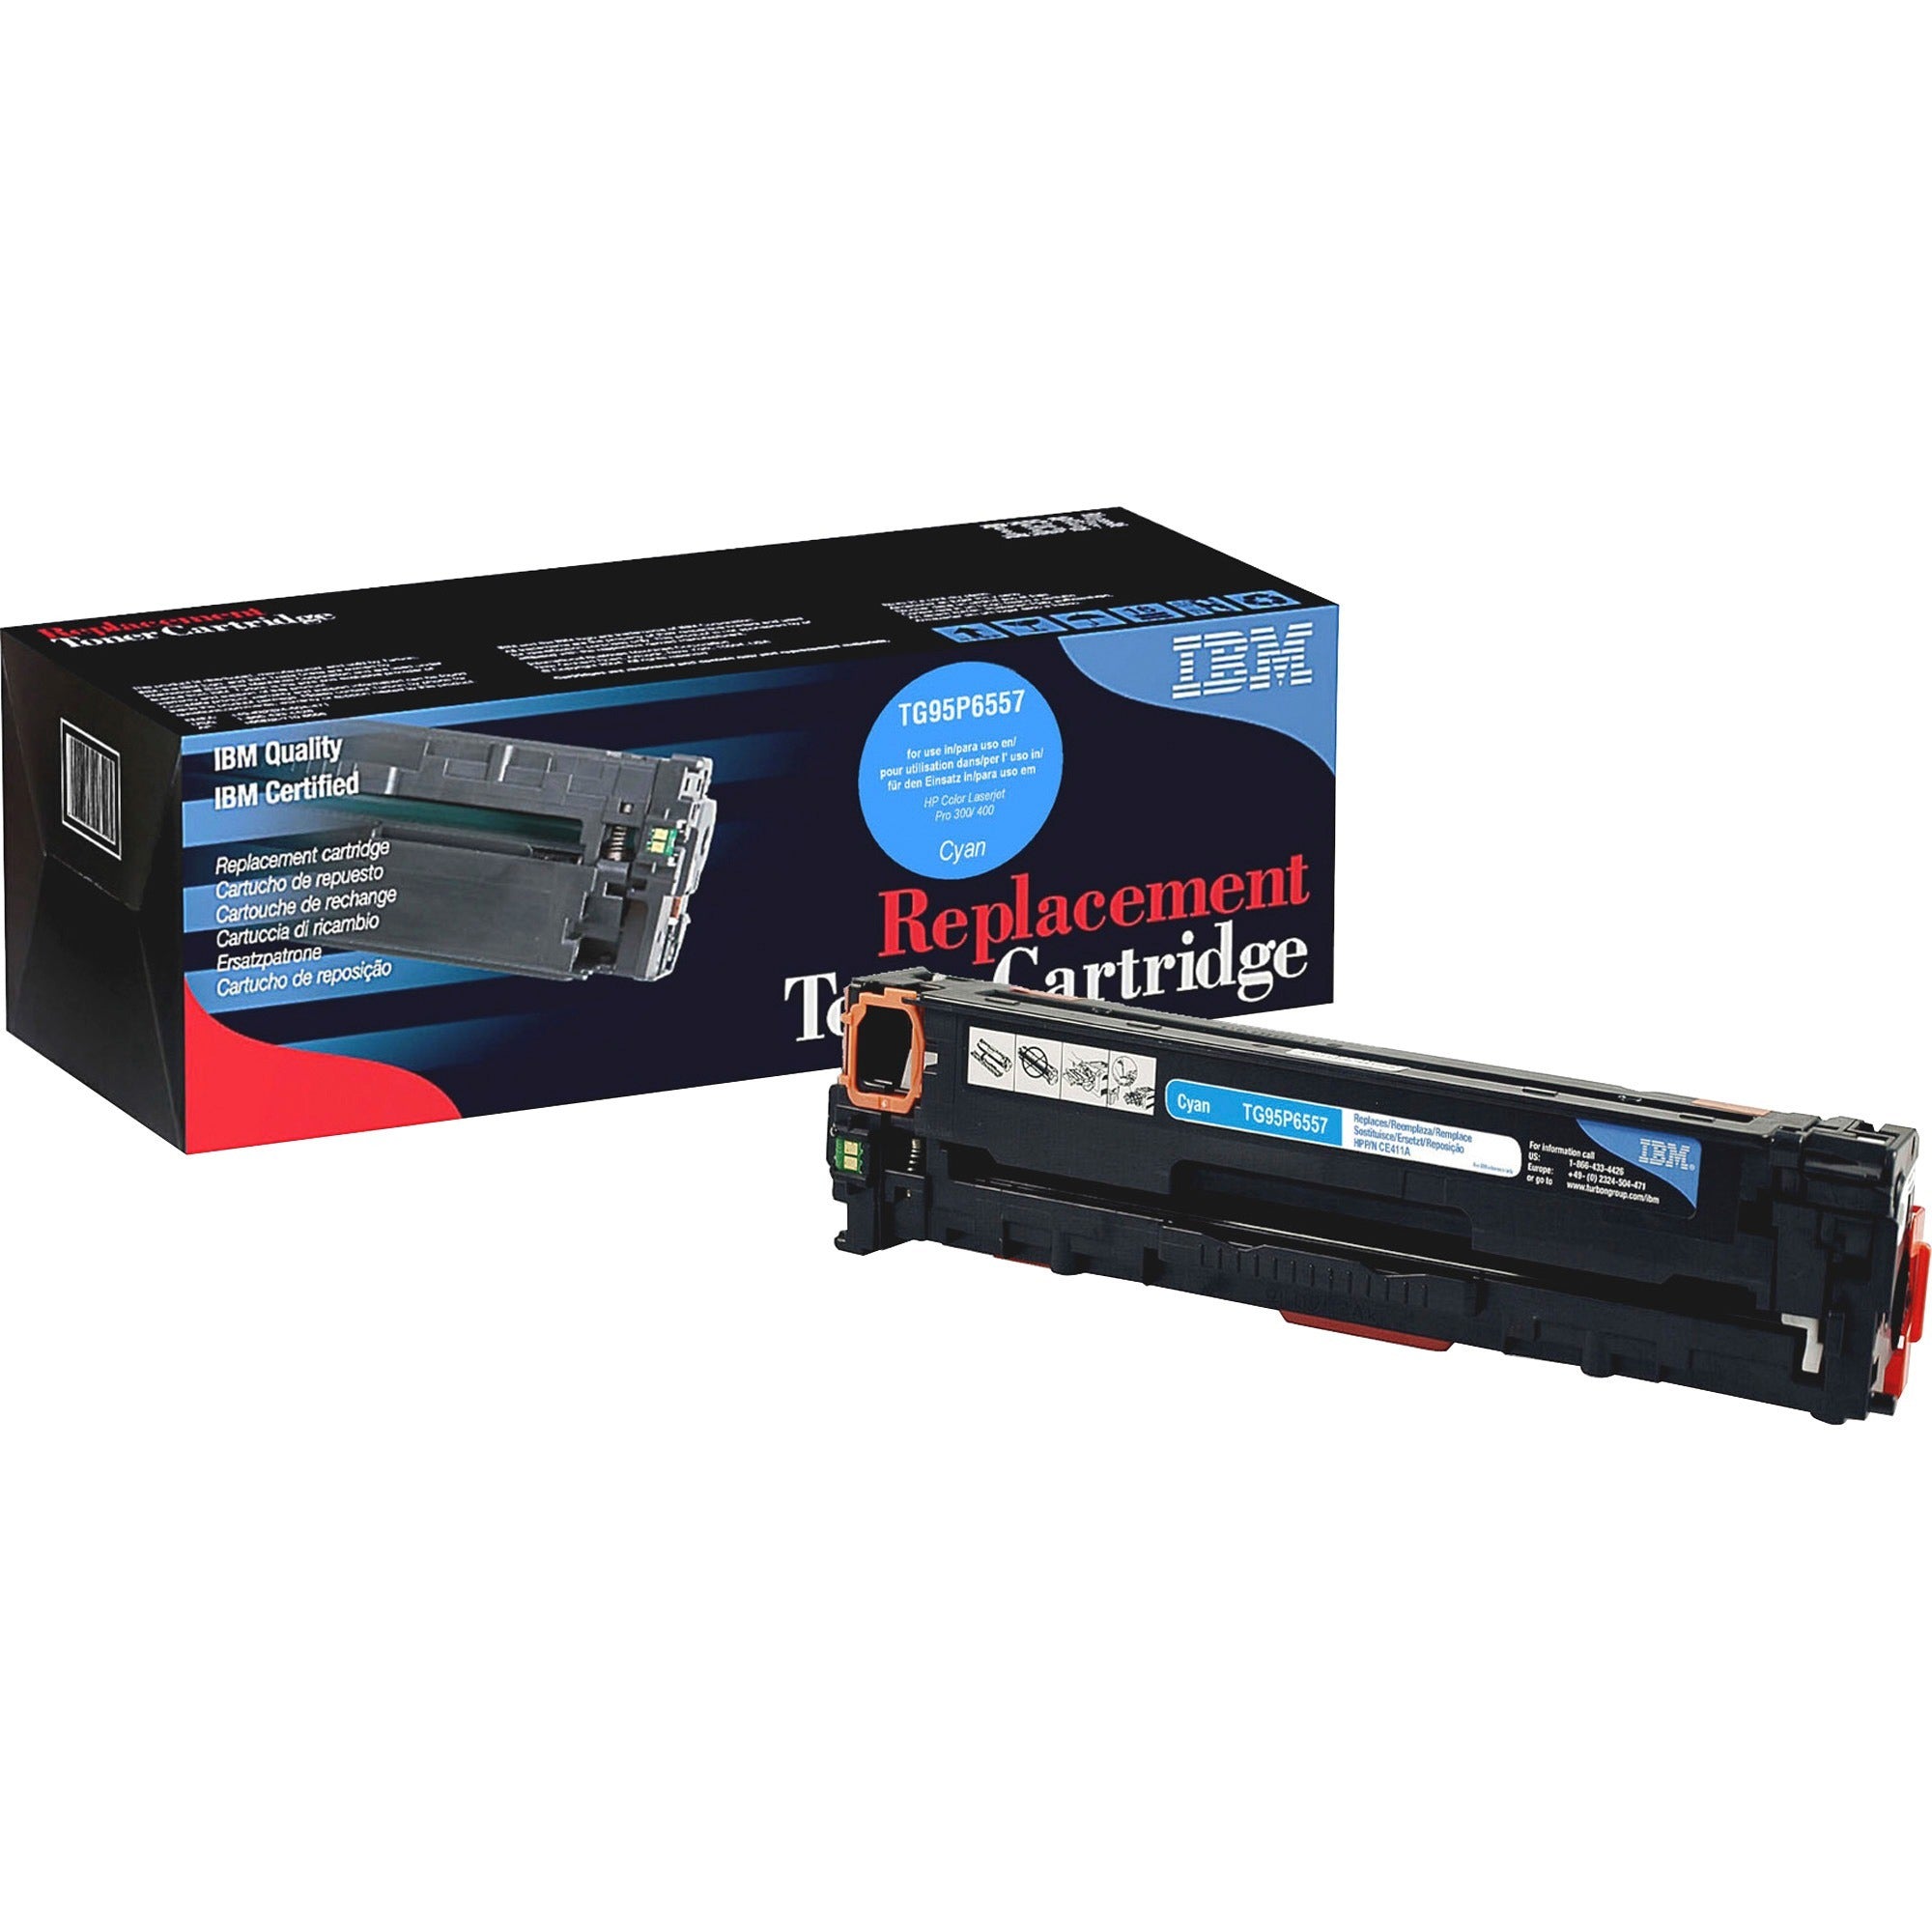 IBM Remanufactured Toner Cartridge - Alternative for HP 305A (CE411A) - Laser - 2600 Pages - Cyan - 1 Each - 